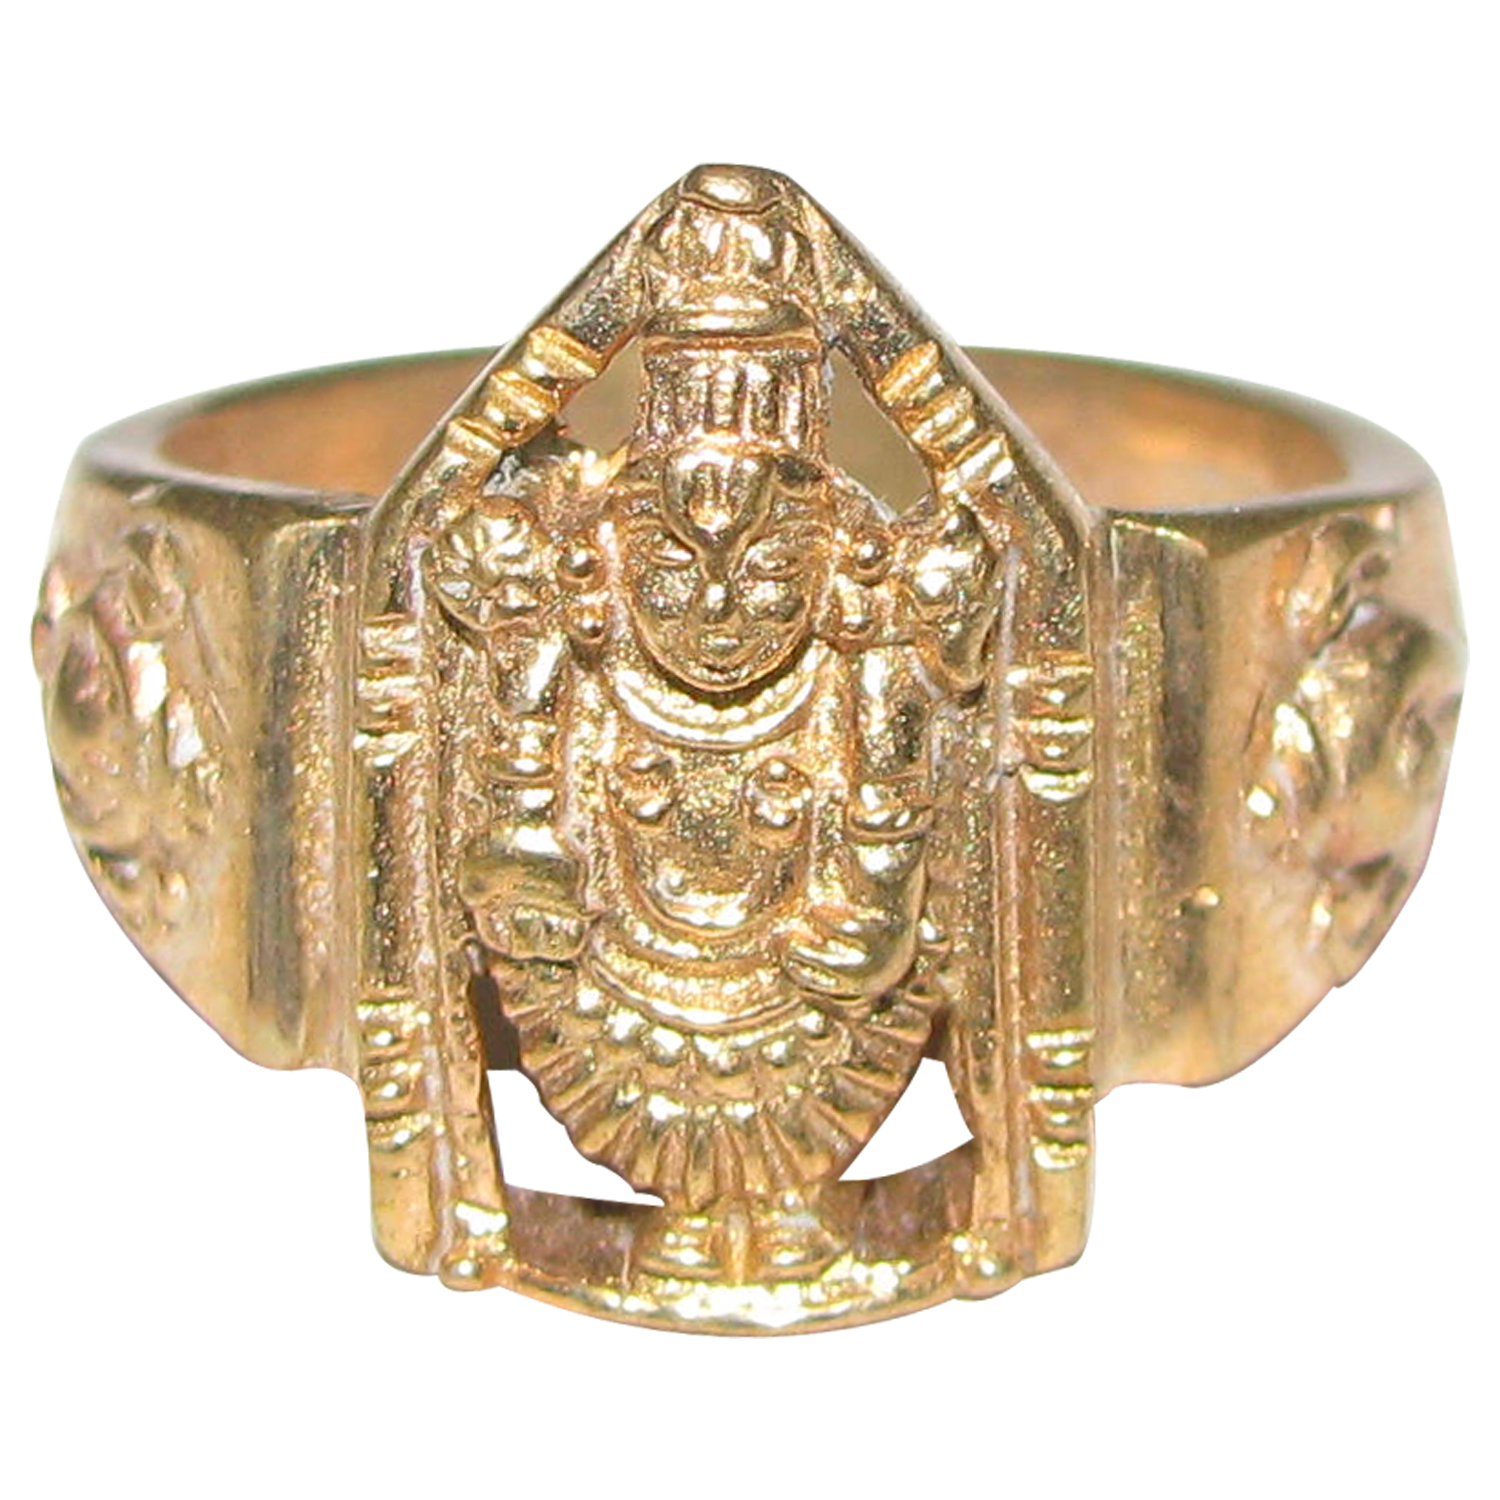 Venkateswara swamy gold ring designs with price and details - YouTube